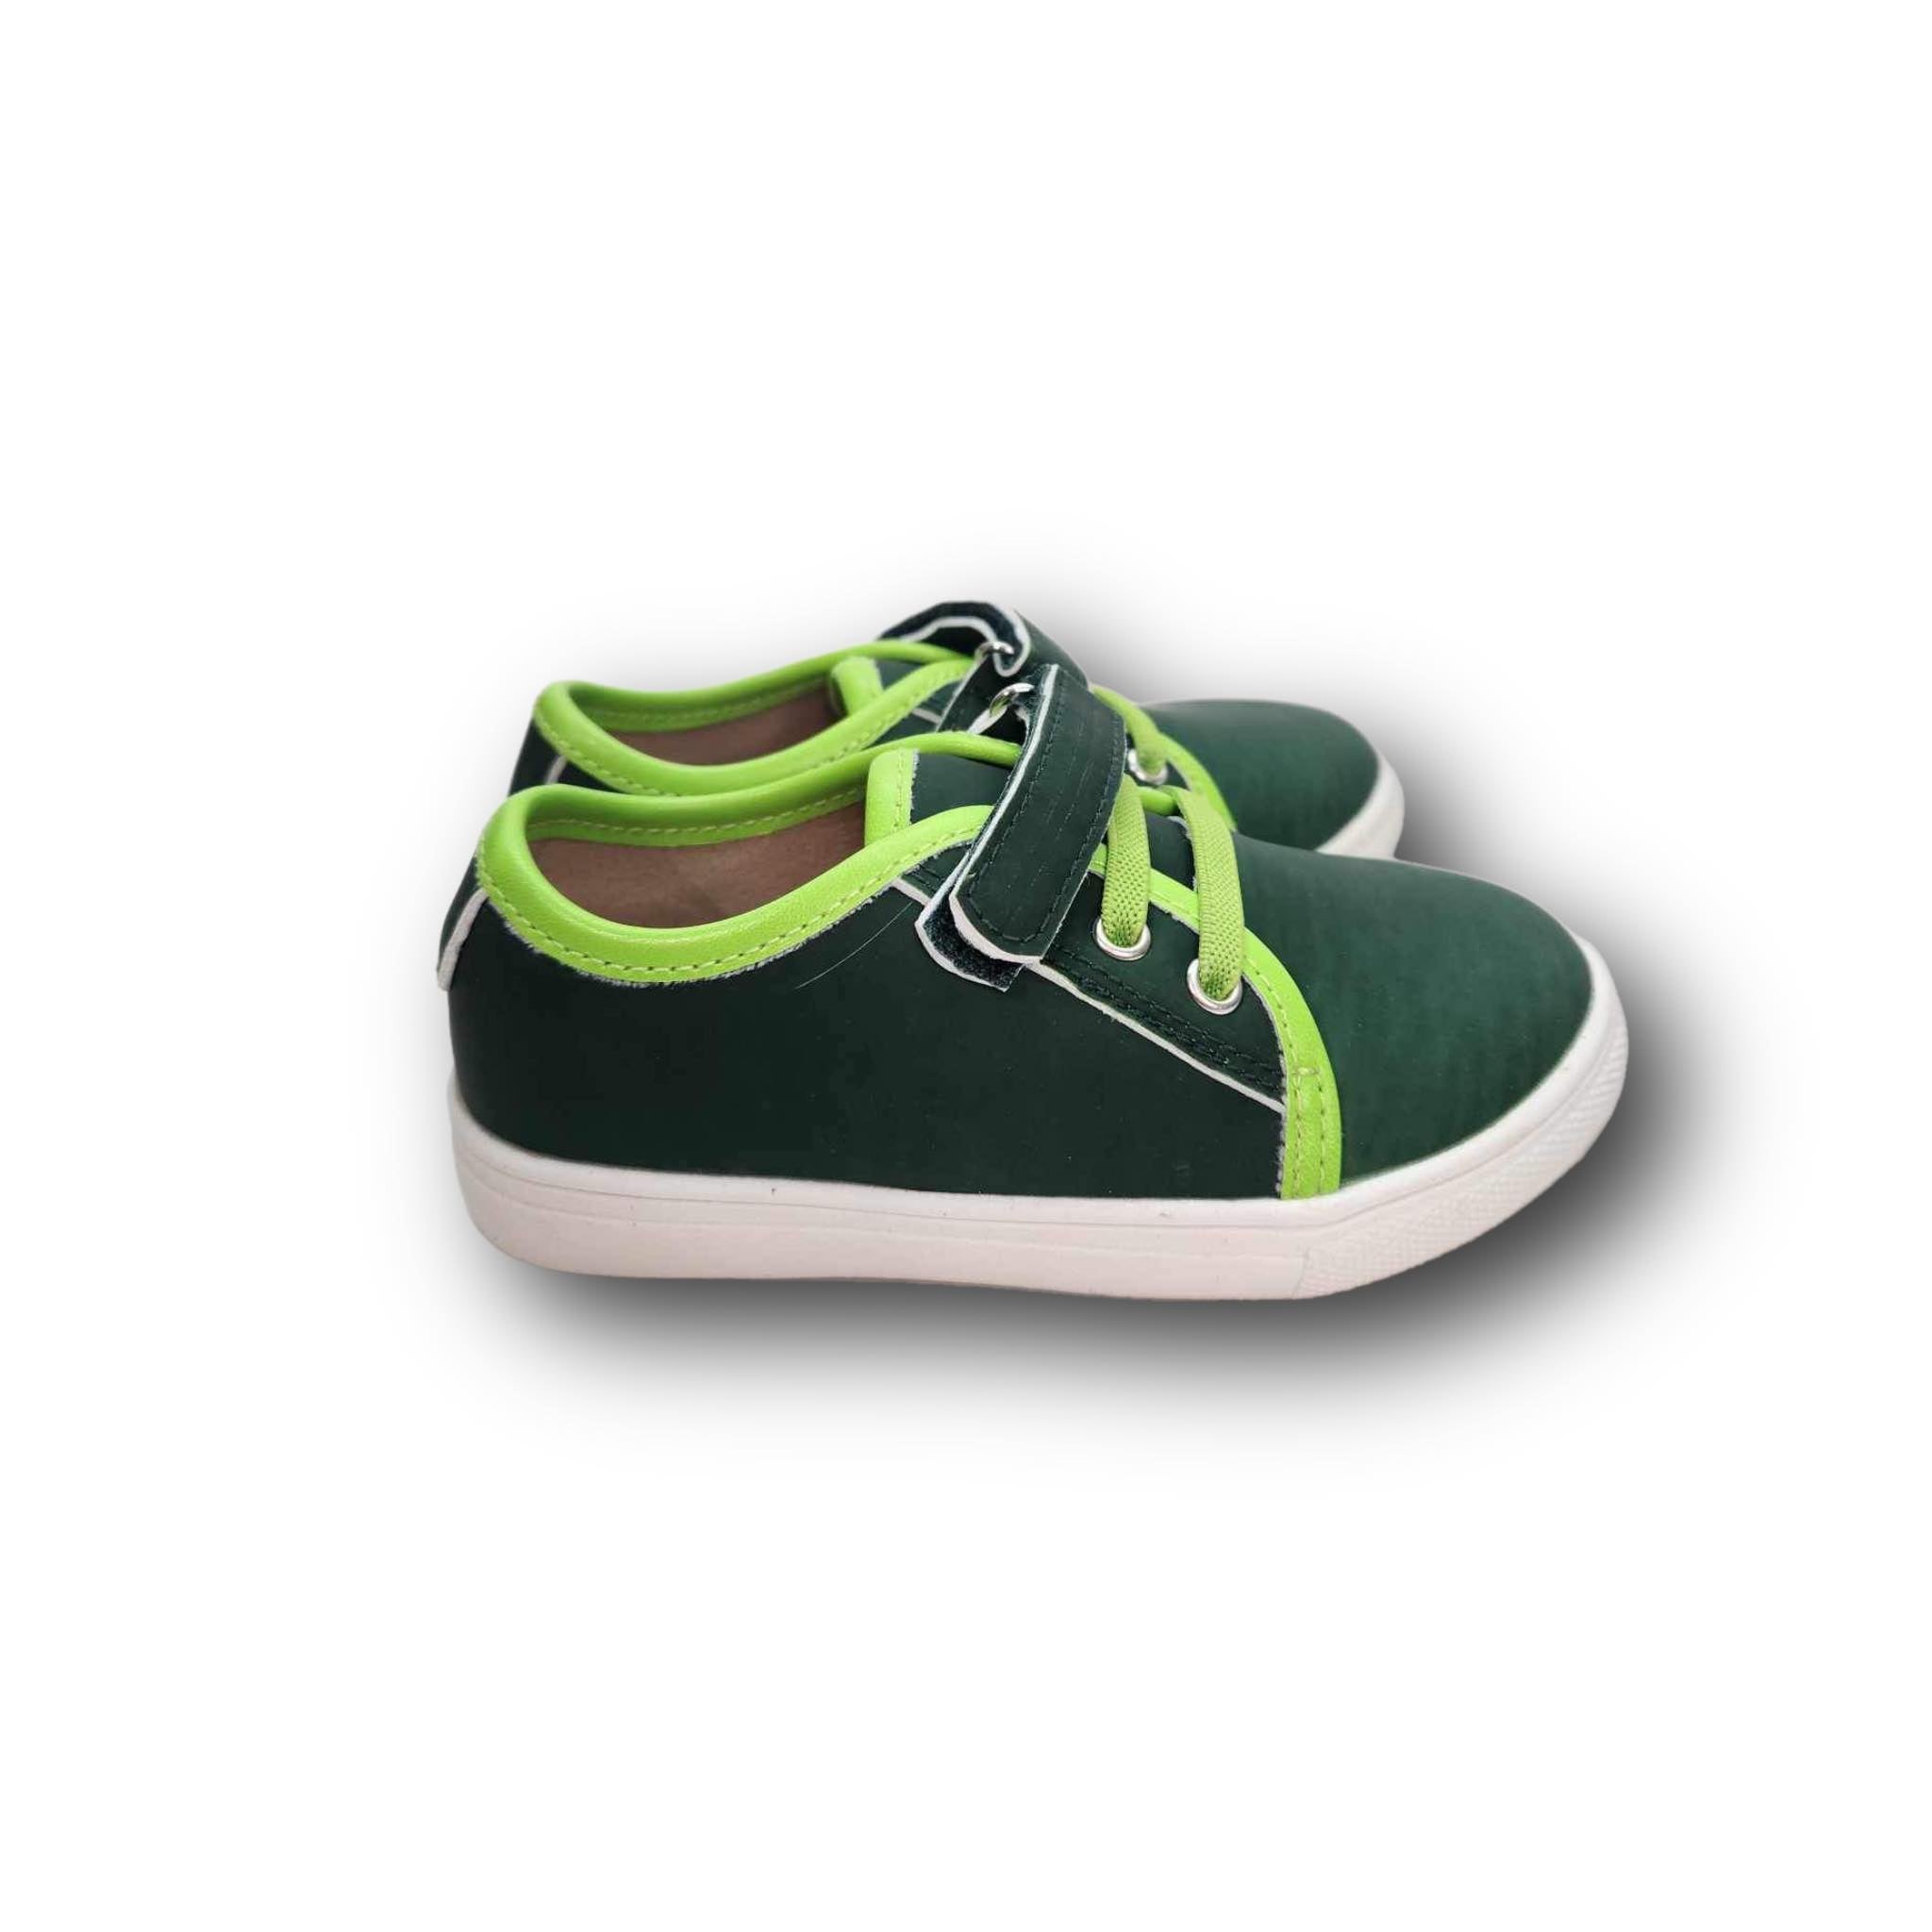 JOSEPH Children's Low-Top Sneaker in Color Changing Green and Lime Leather